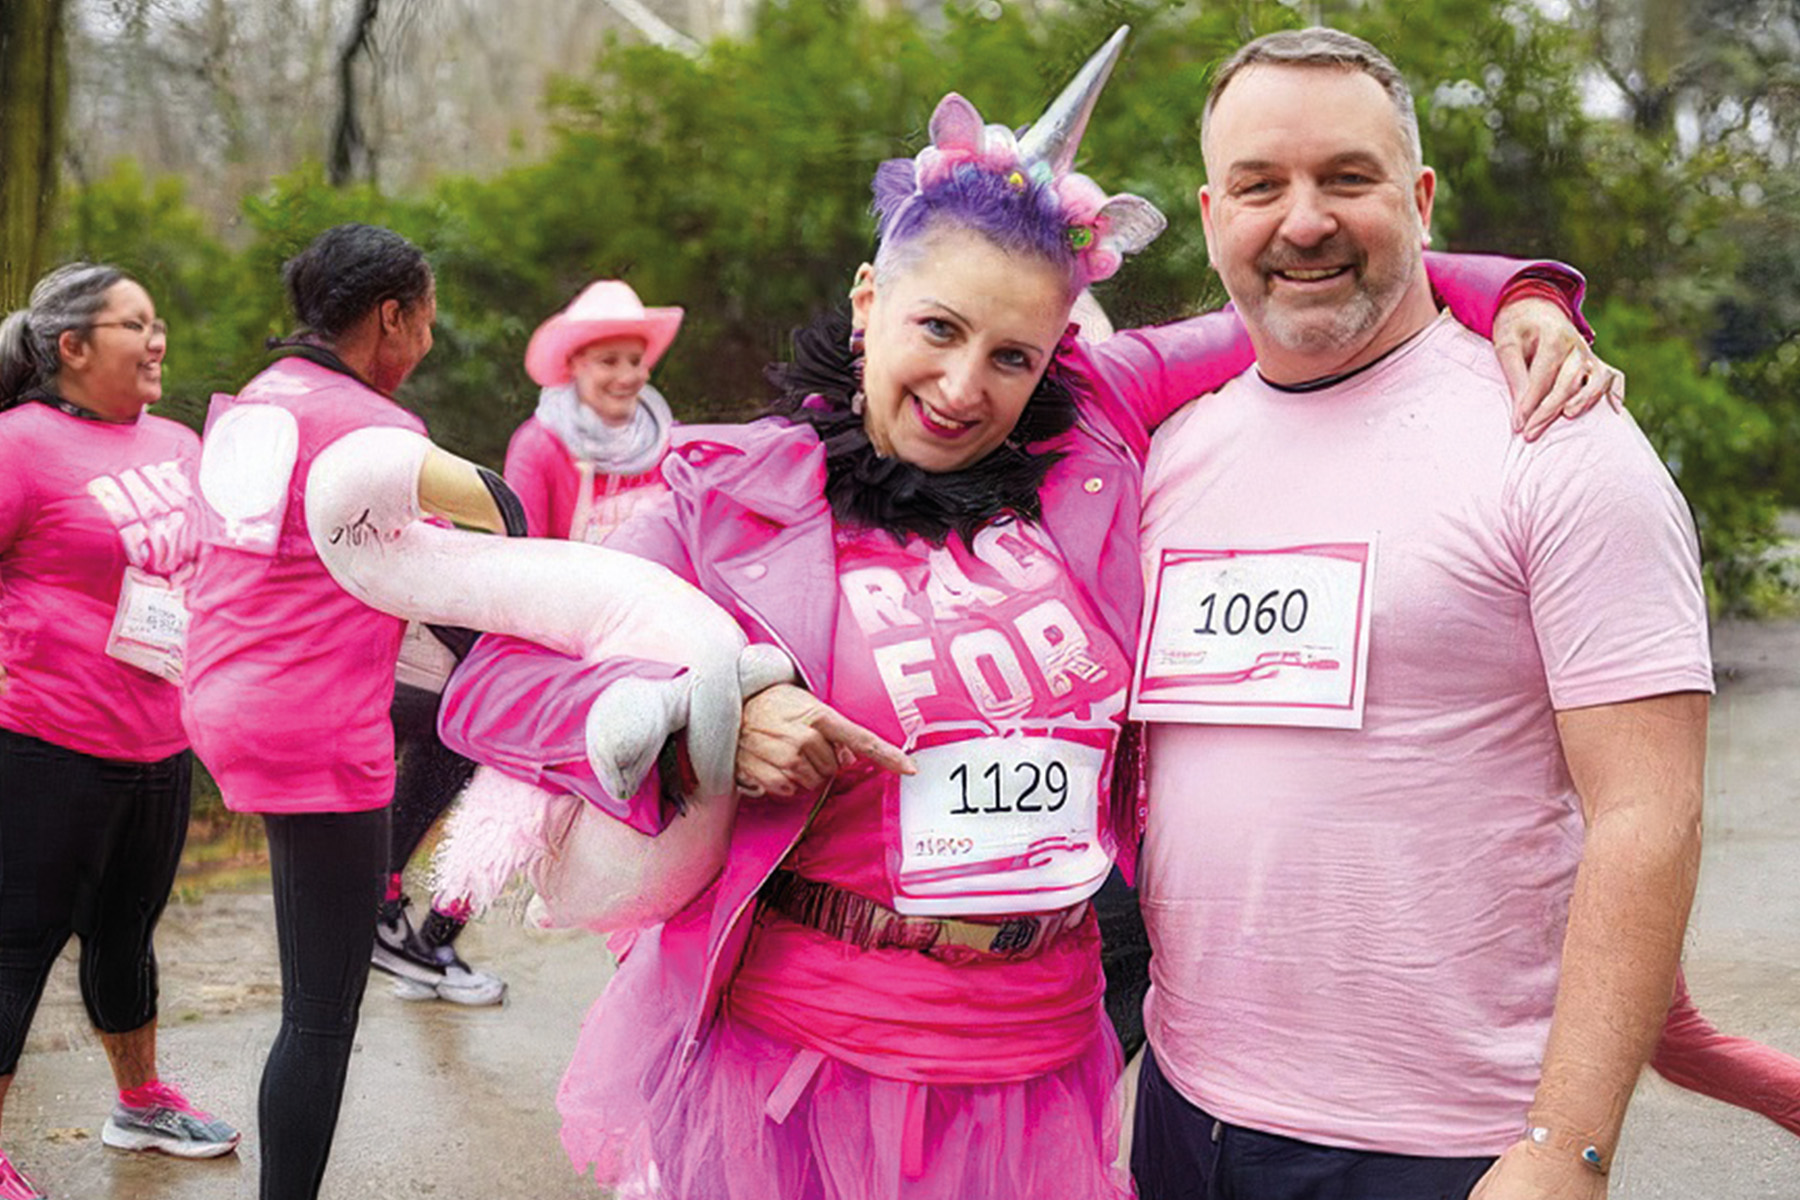 A woman dressed in pink holding a flamingo, wearing a unicorn horn and man dressed in pink and smiling